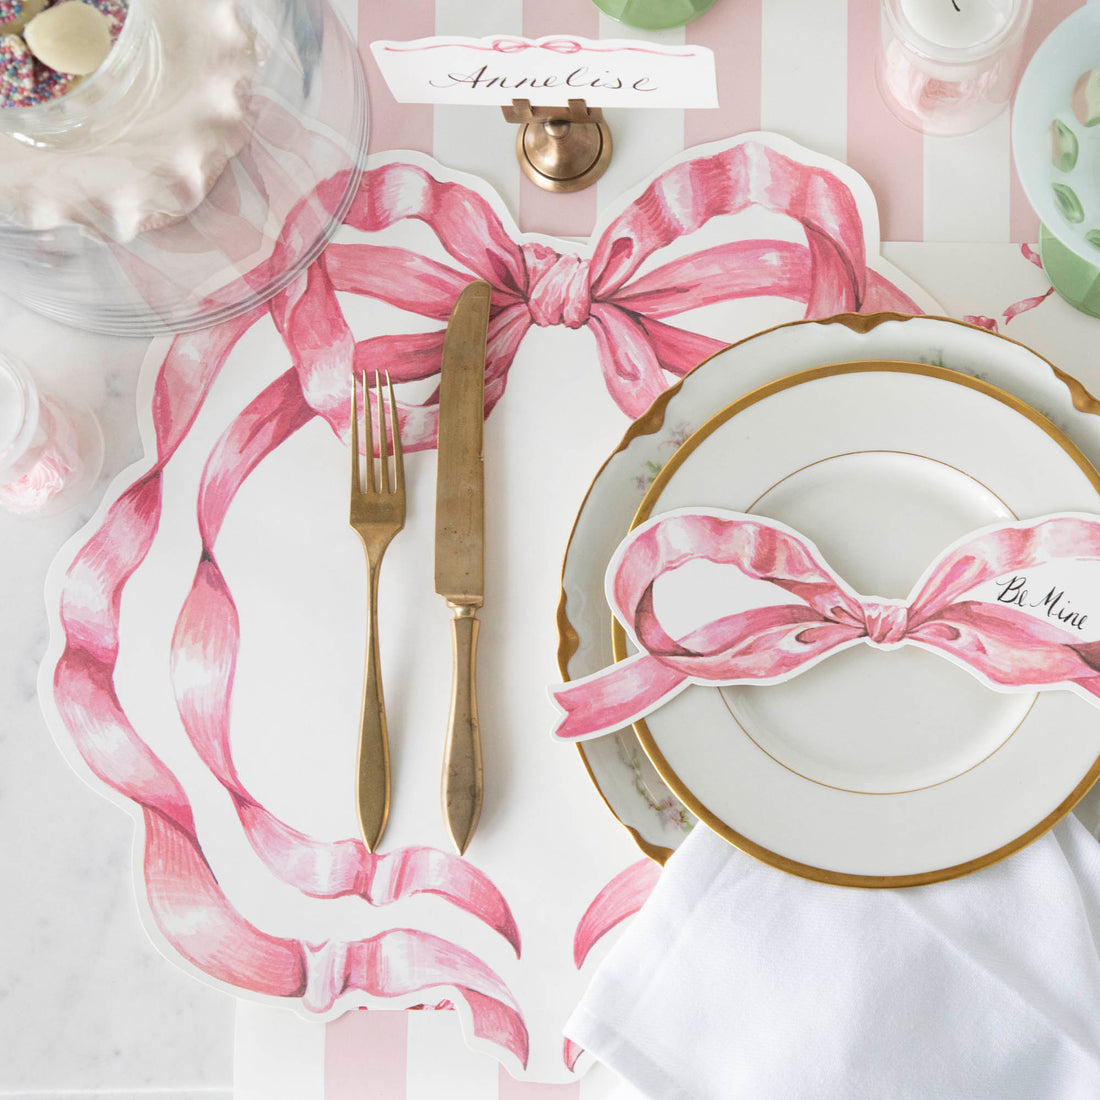 A Die-cut Pink Bow Placemat under a soft place setting, from above.